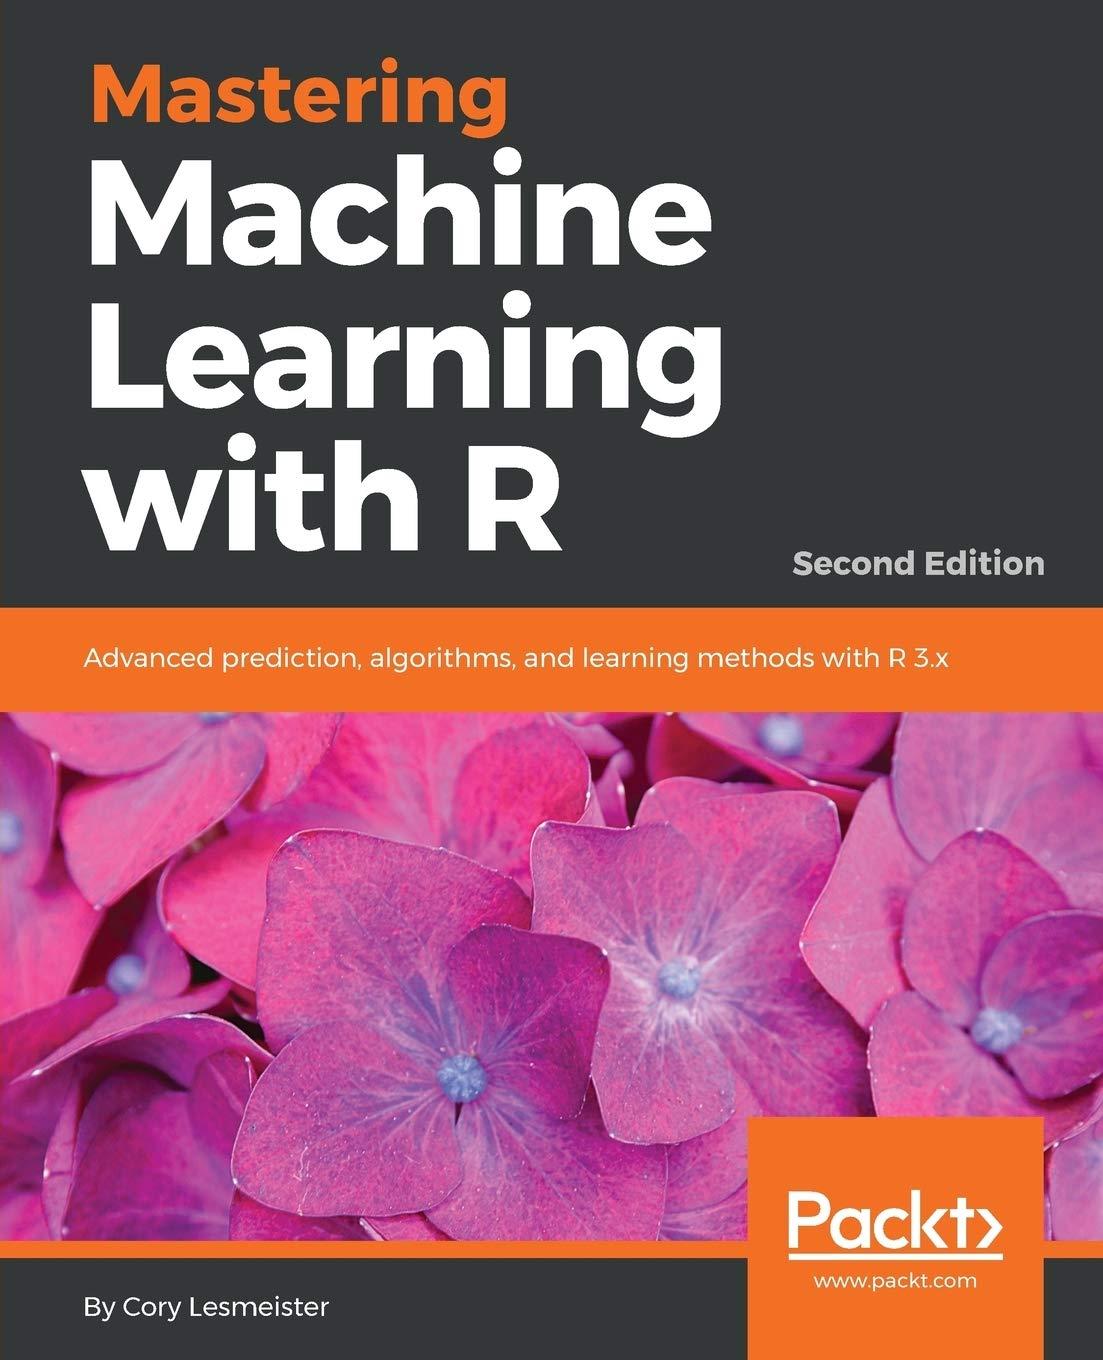 mastering machine learning with r  advanced prediction  algorithms  and learning methods with r 3.x 2nd